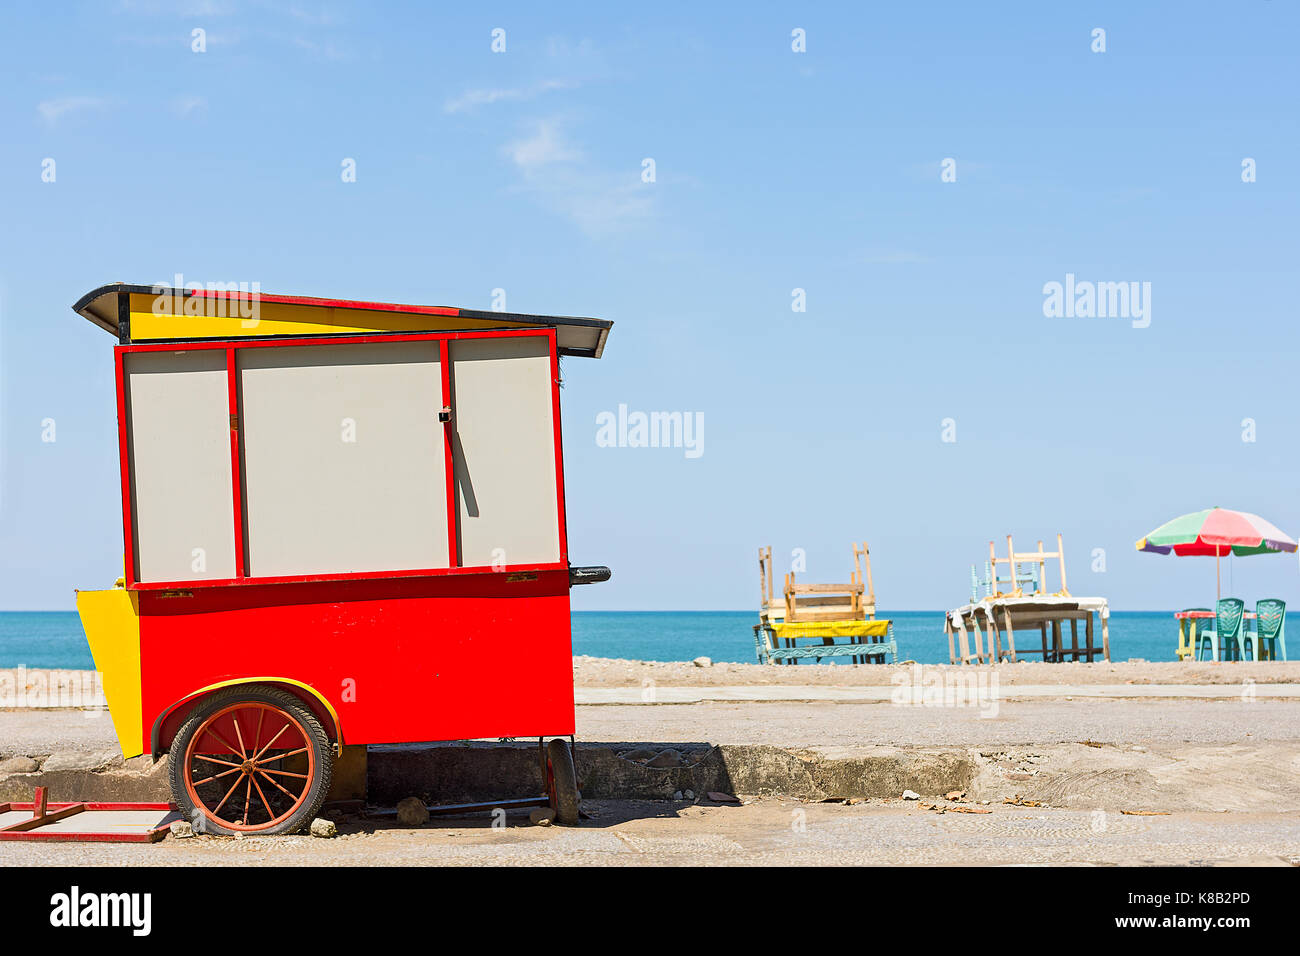 A street vendors cart all closed up at the beach side promenade during the day with basic stacked table and chairs in the background. Stock Photo